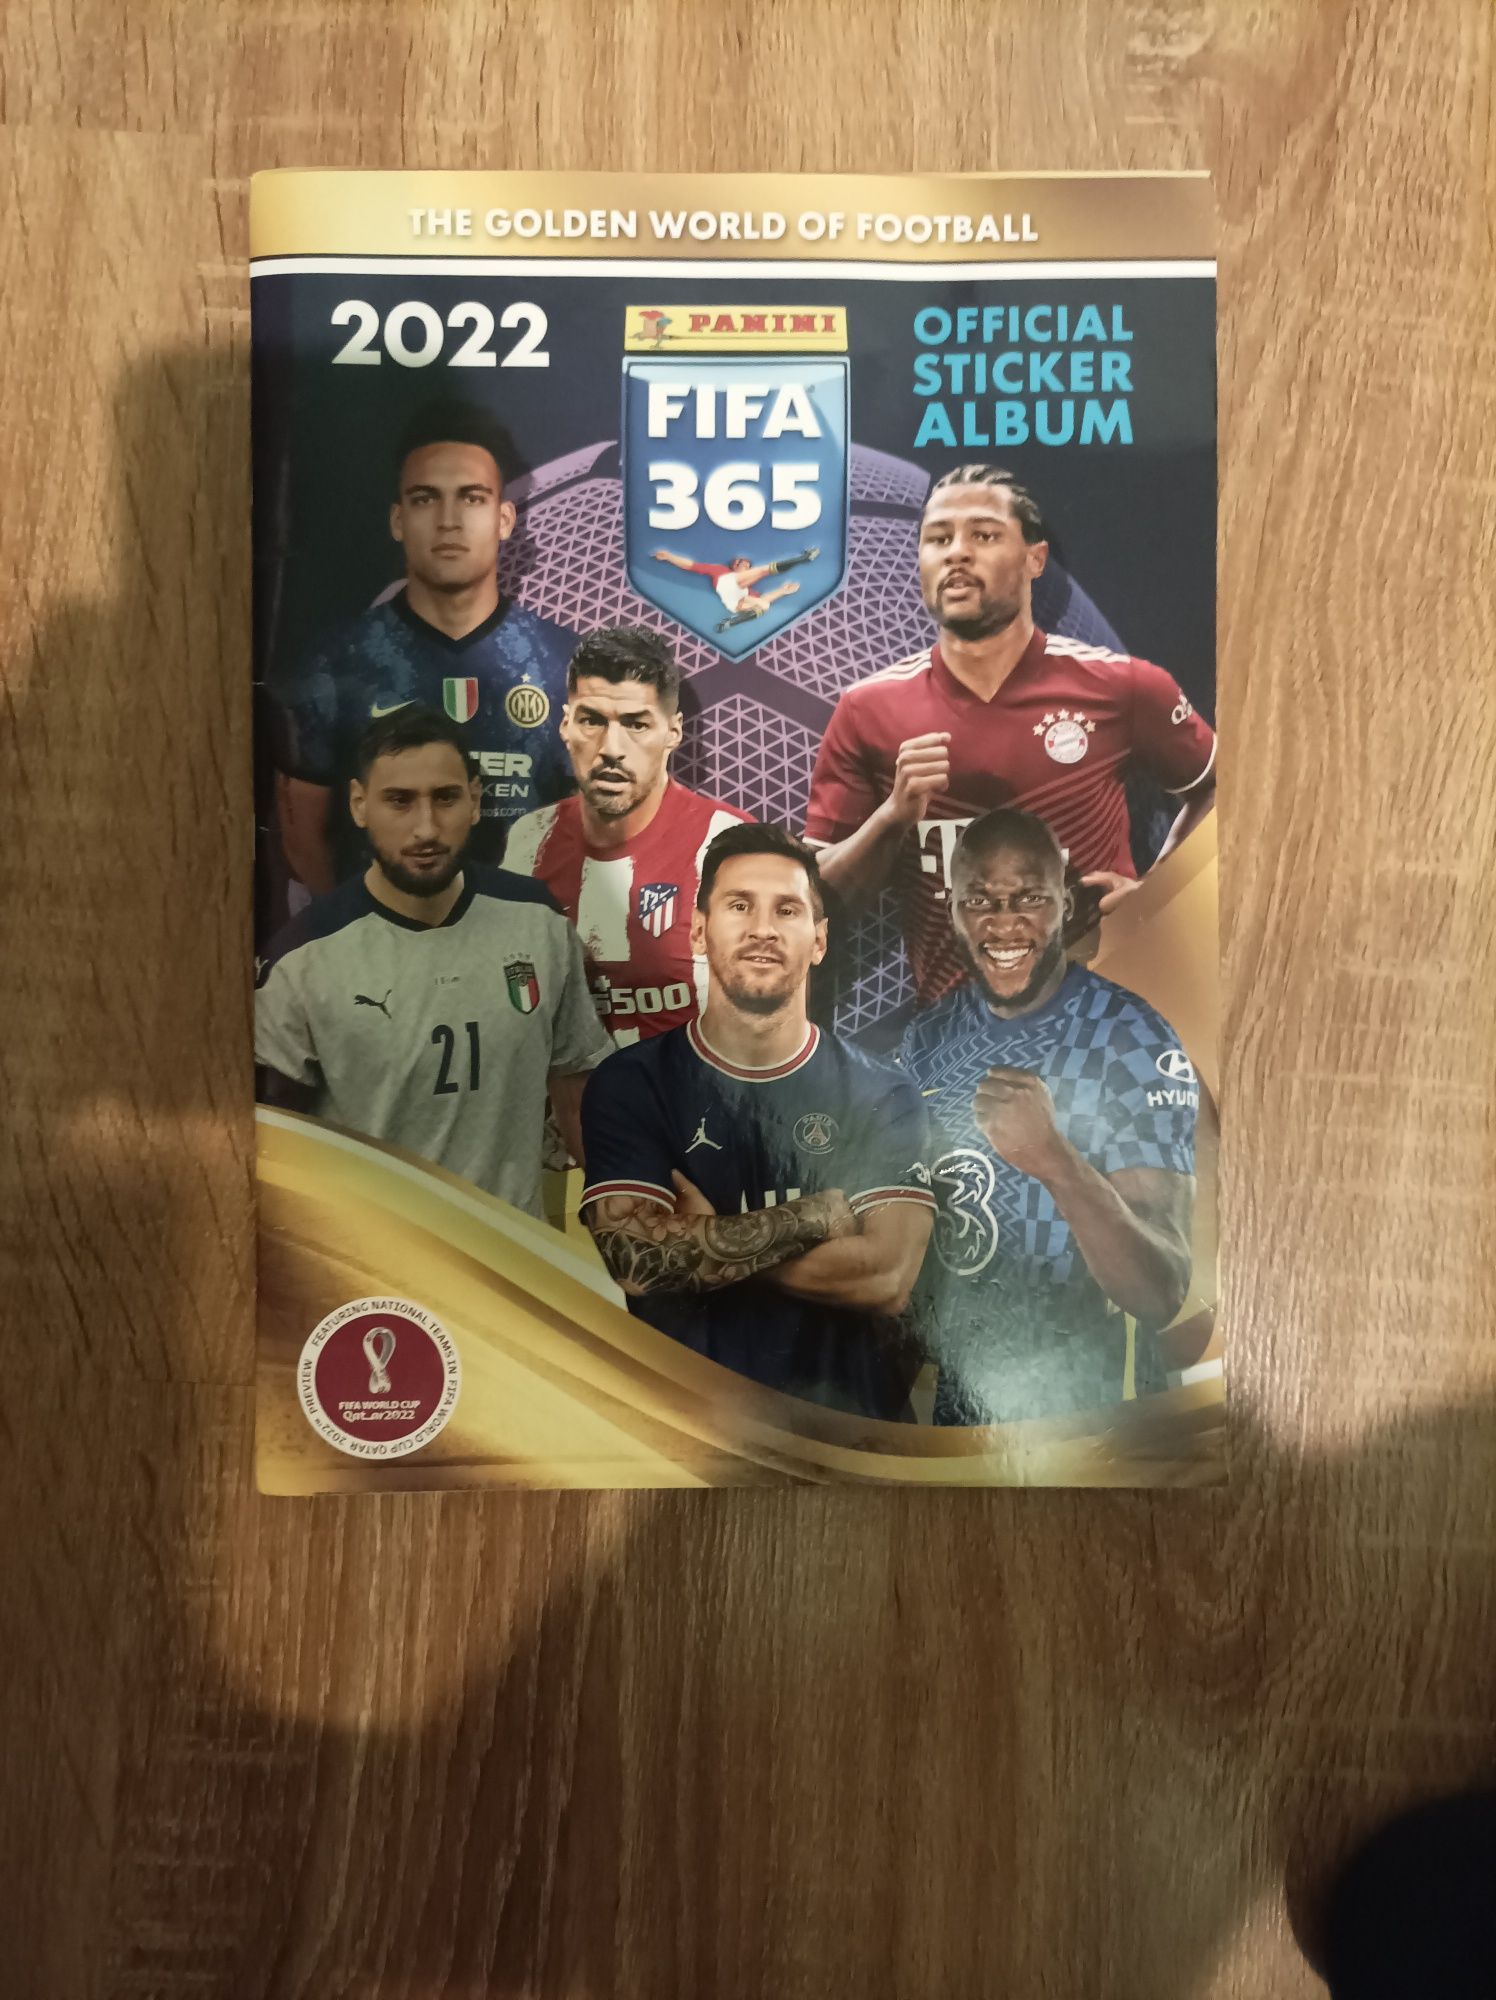 Vand albumul the golden world of football 2022